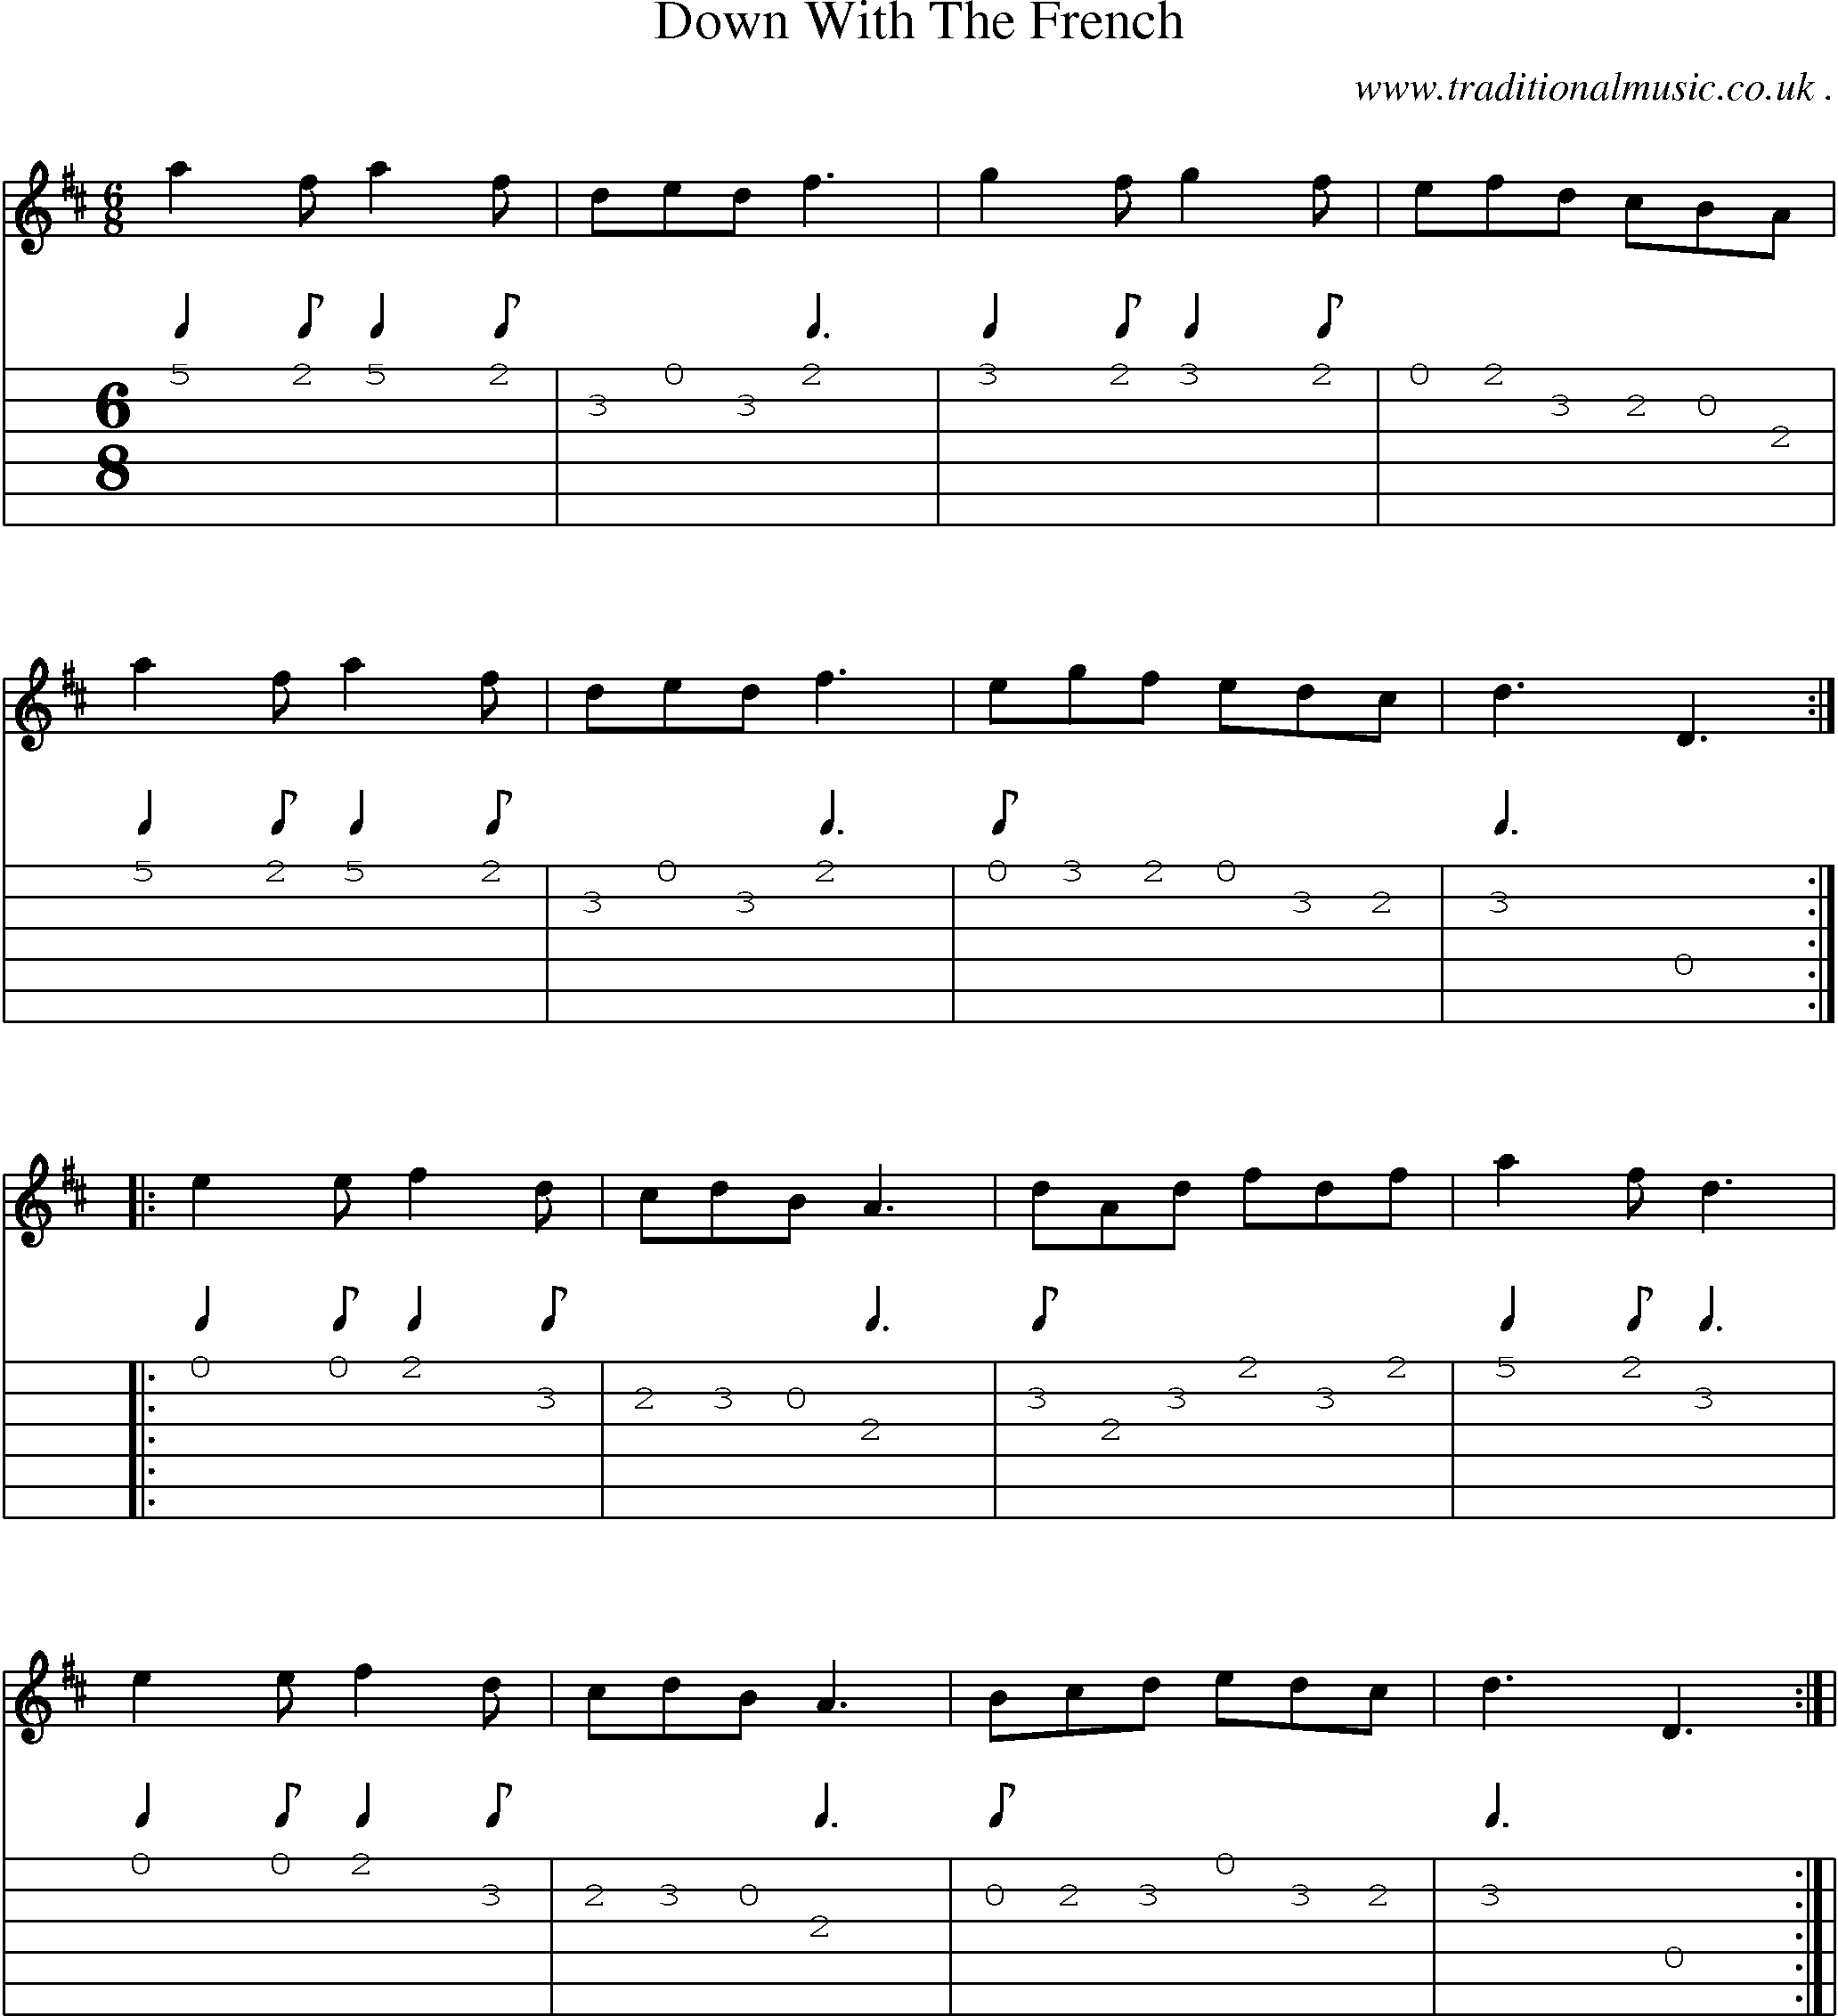 Sheet-Music and Guitar Tabs for Down With The French